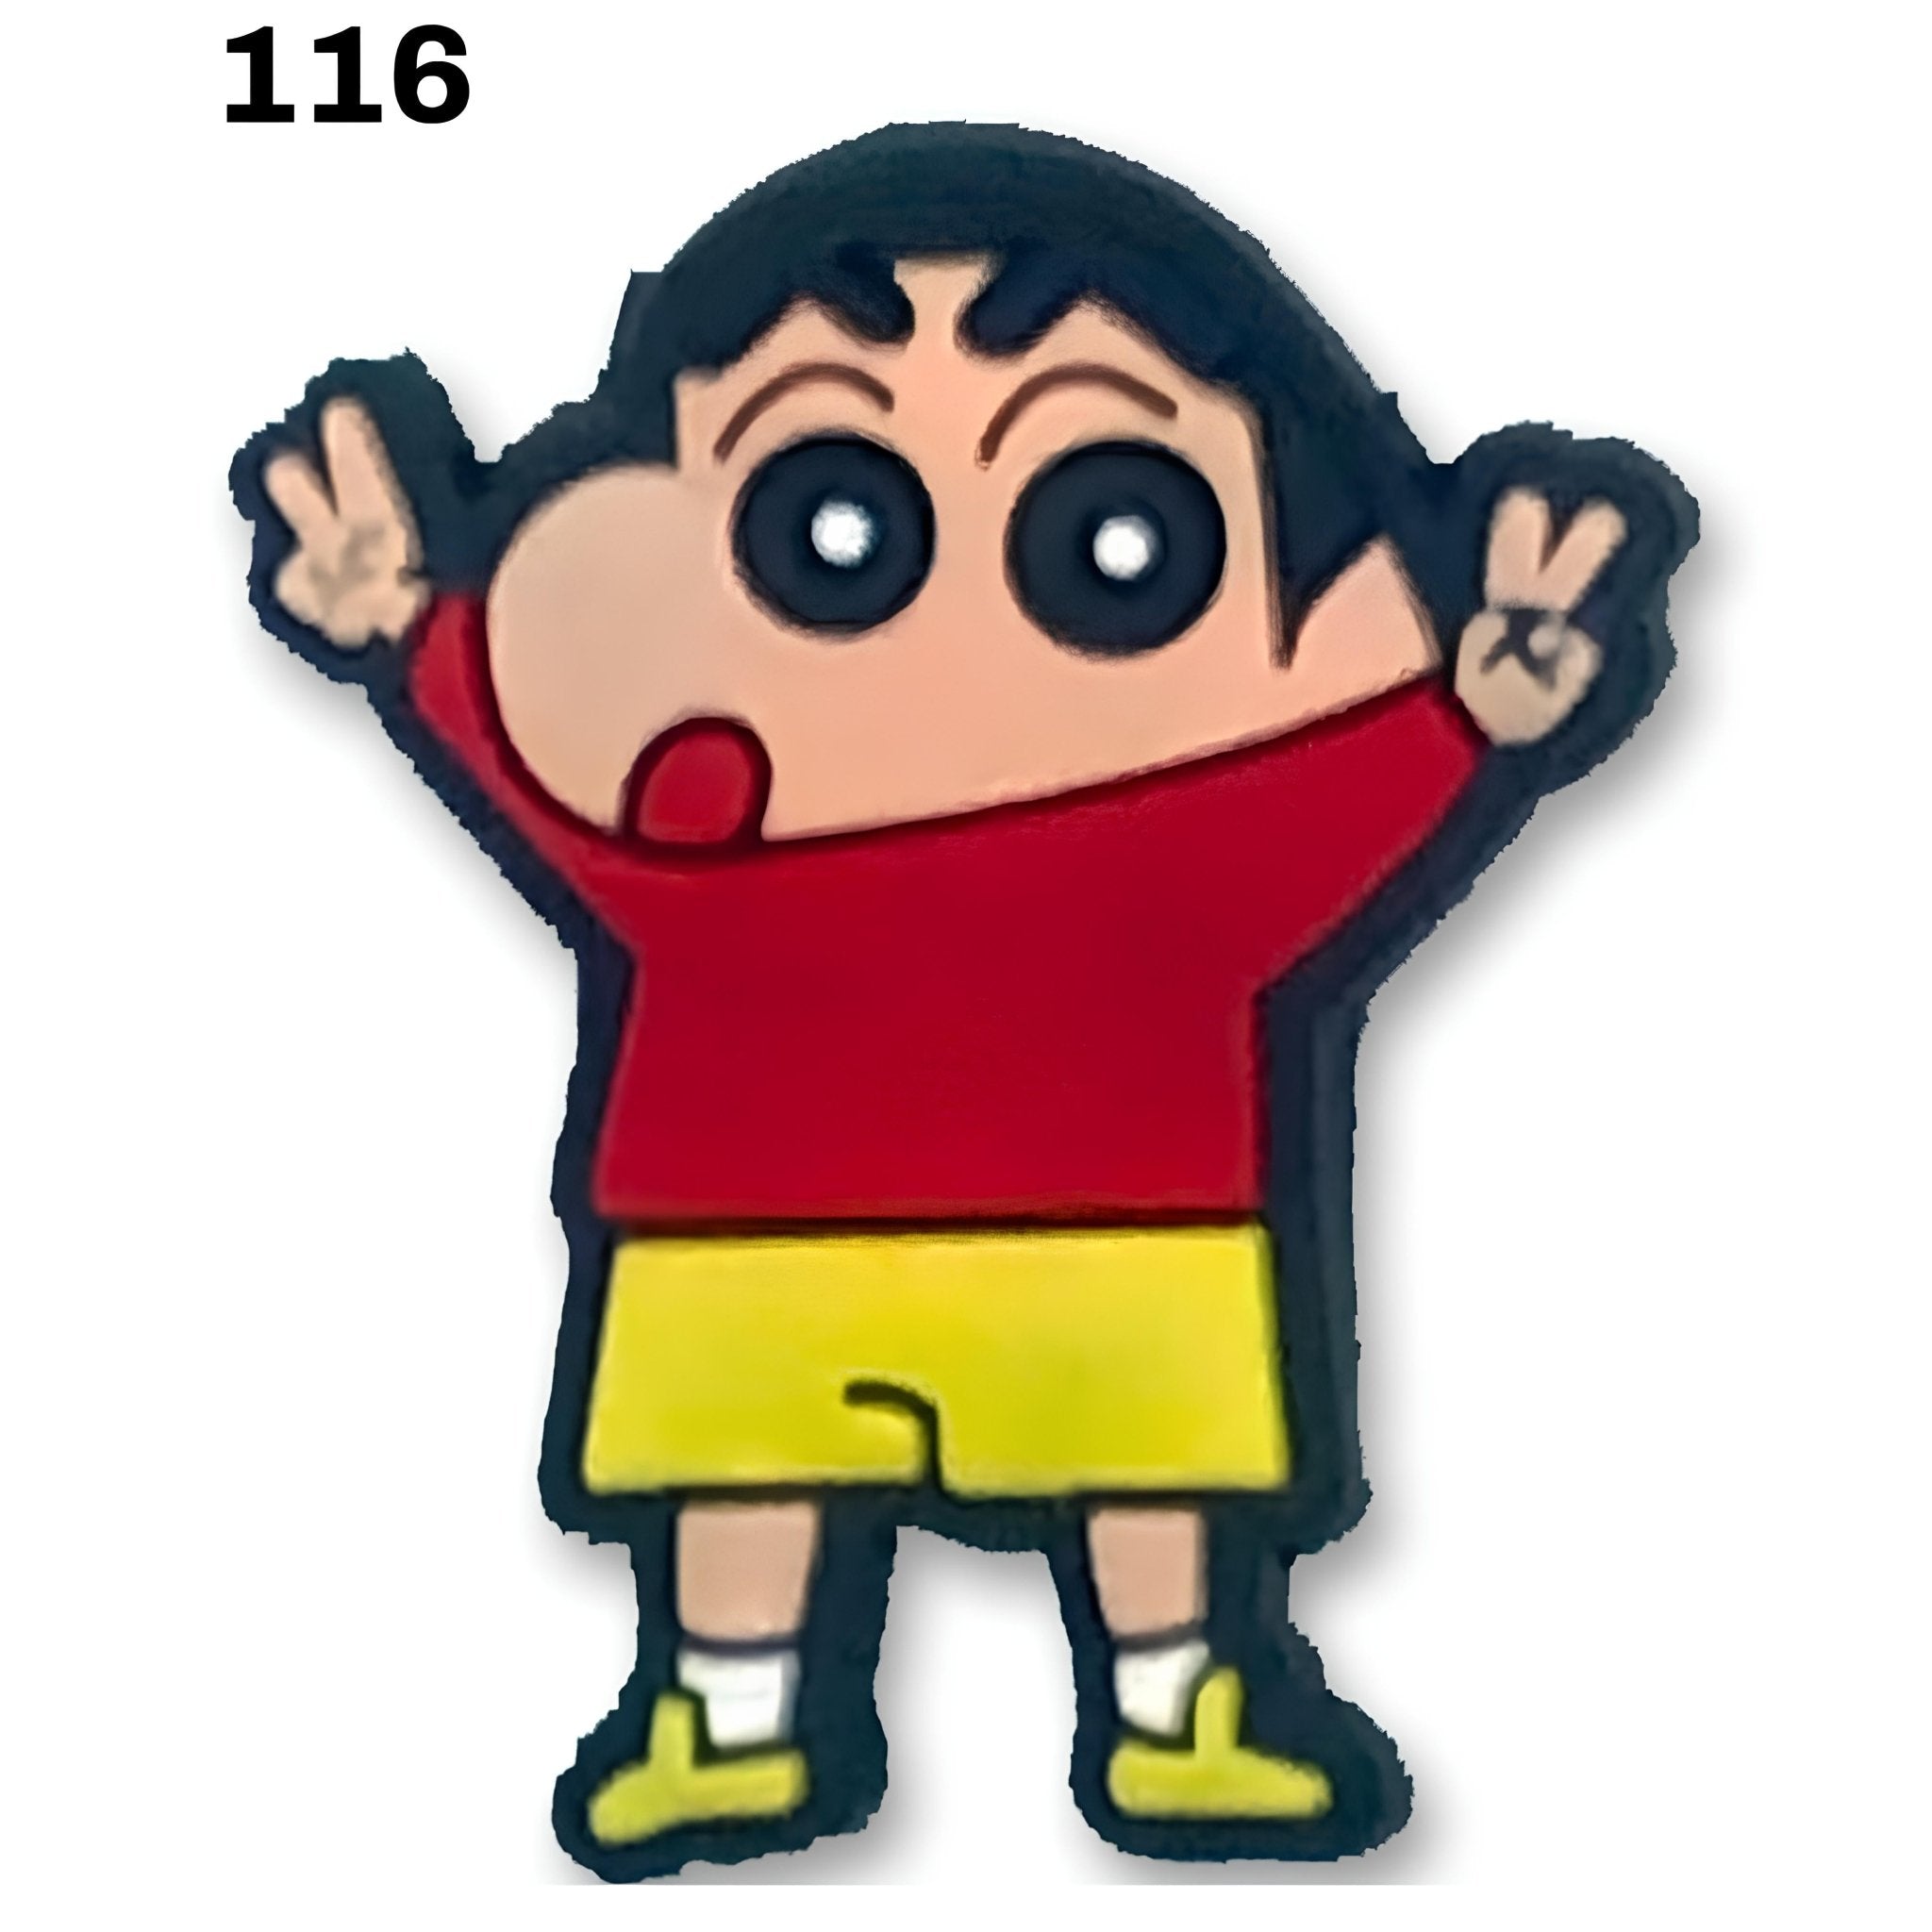 "Shinchan Peace Out Charm ✌️😄: Playful Vibes!" - Questsole